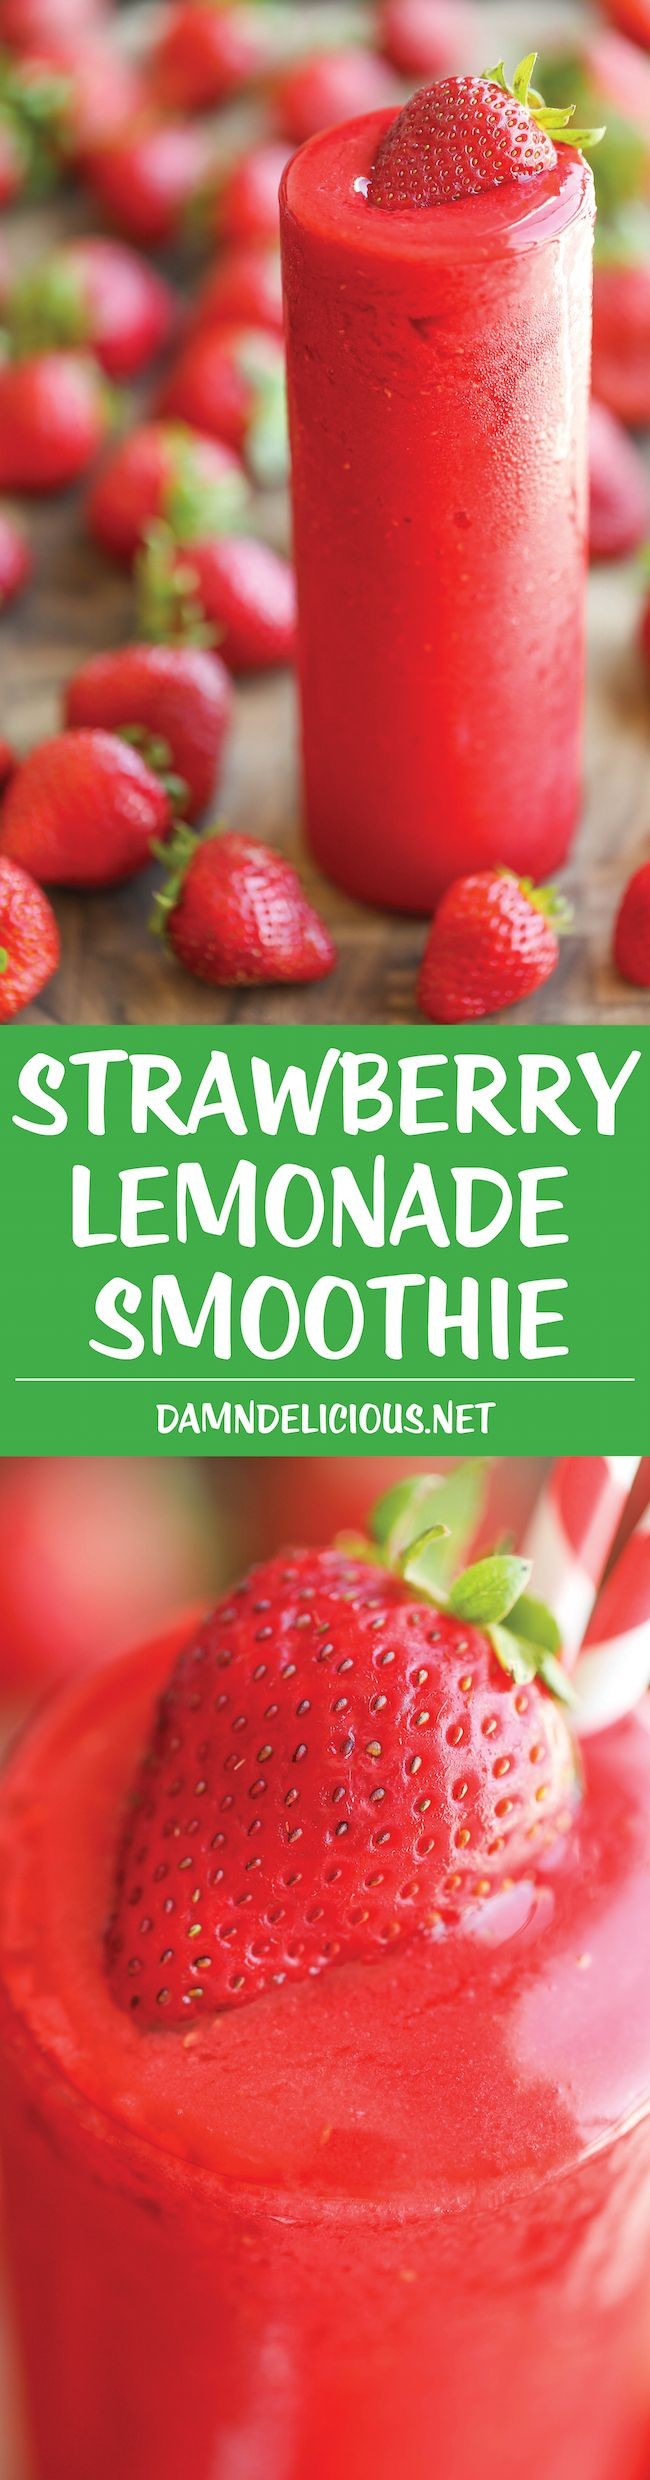 Strawberry Lemonade Smoothie - Sweet, tangy and wo...